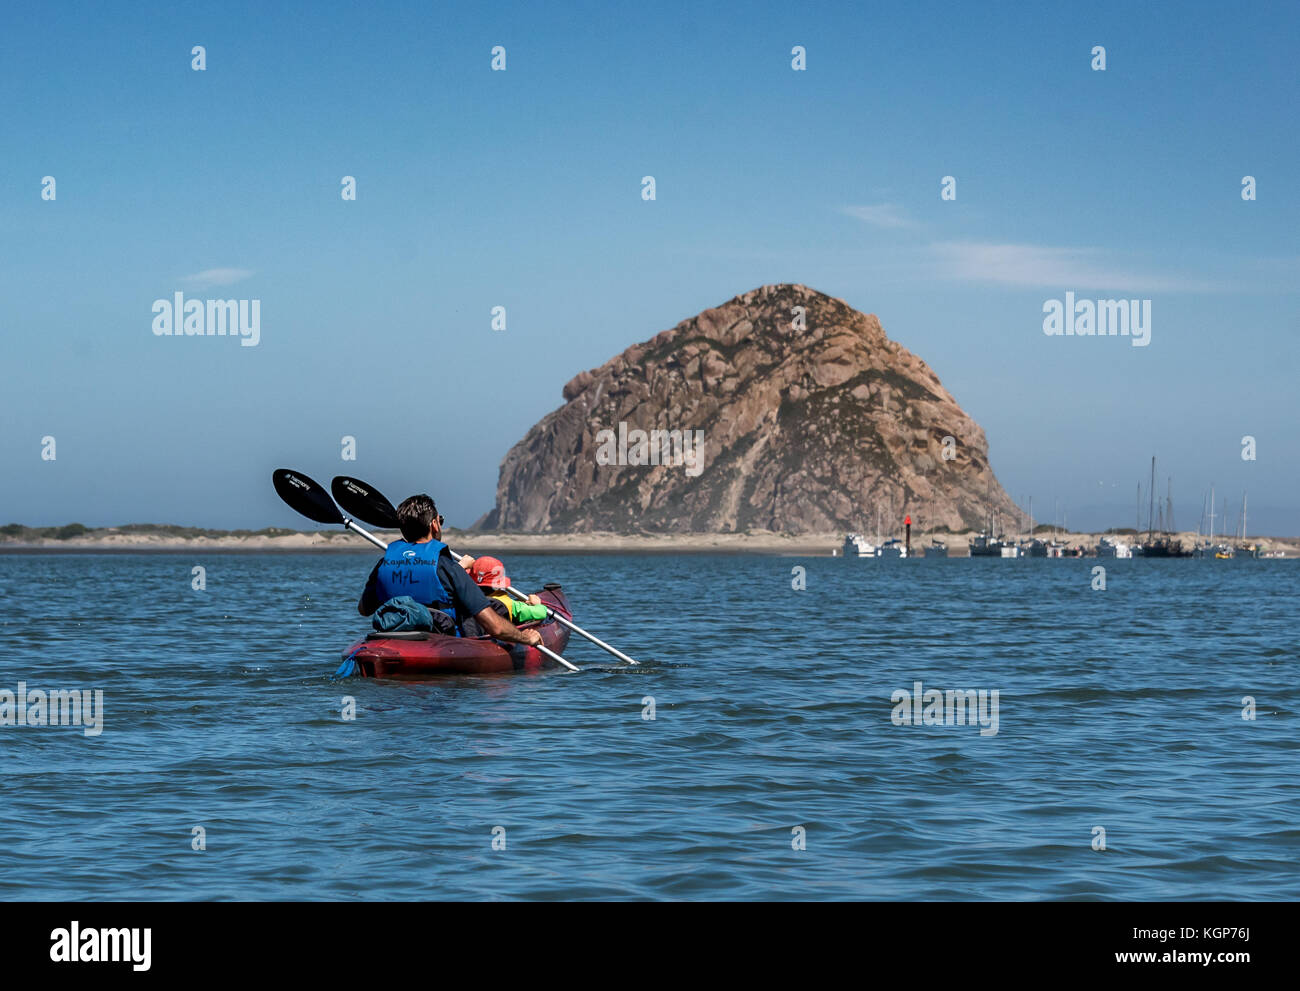 A father and son paddle a tandem red kayak toward Morro Rock on Morro Bay, the young boy wears an orange sun hat, both are paddling together Stock Photo